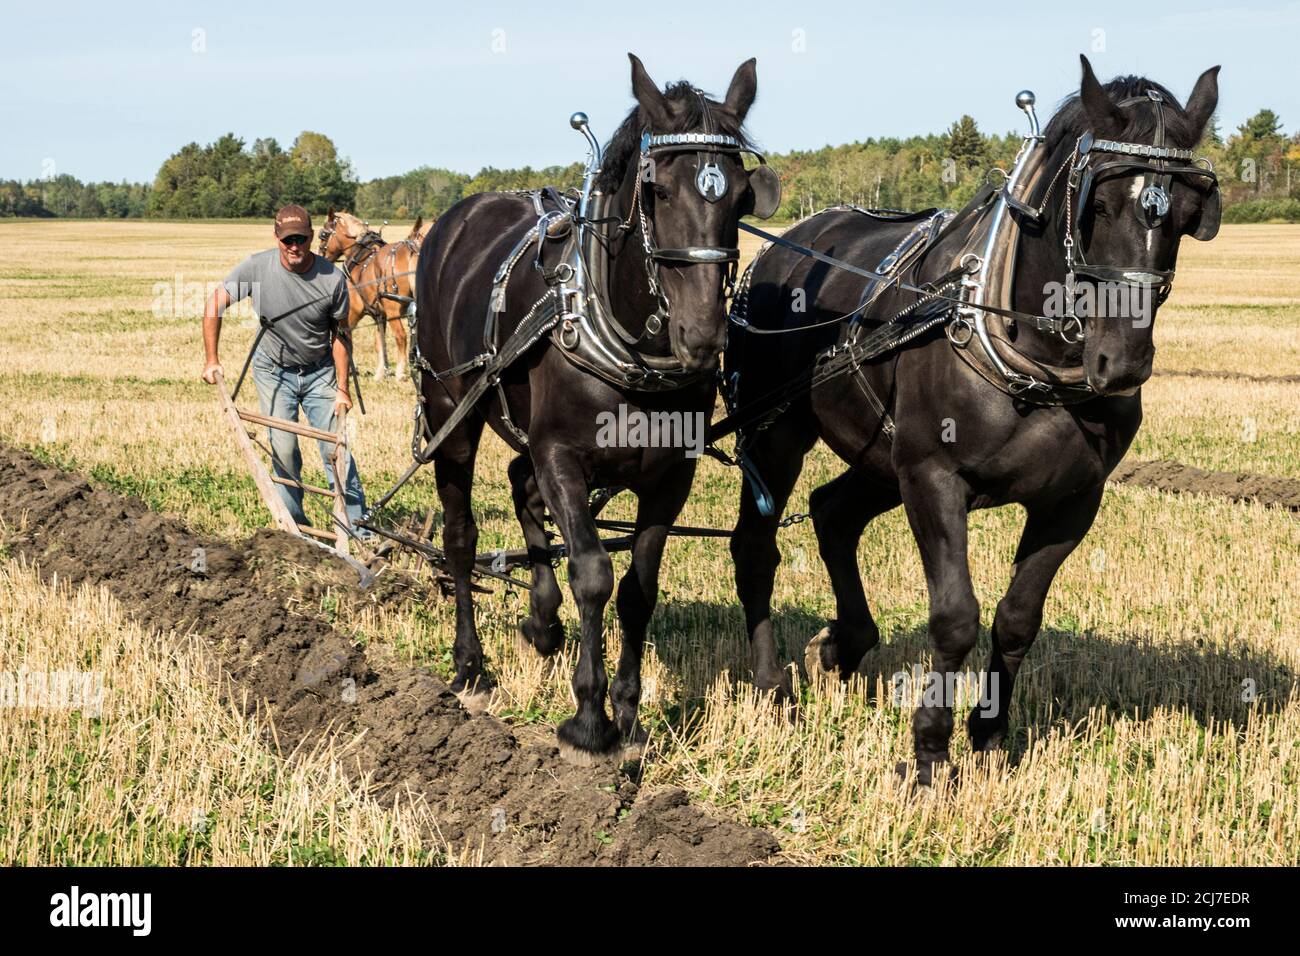 International Plowing Match competition, horse plowing, Verner, Ontario, Canada Stock Photo